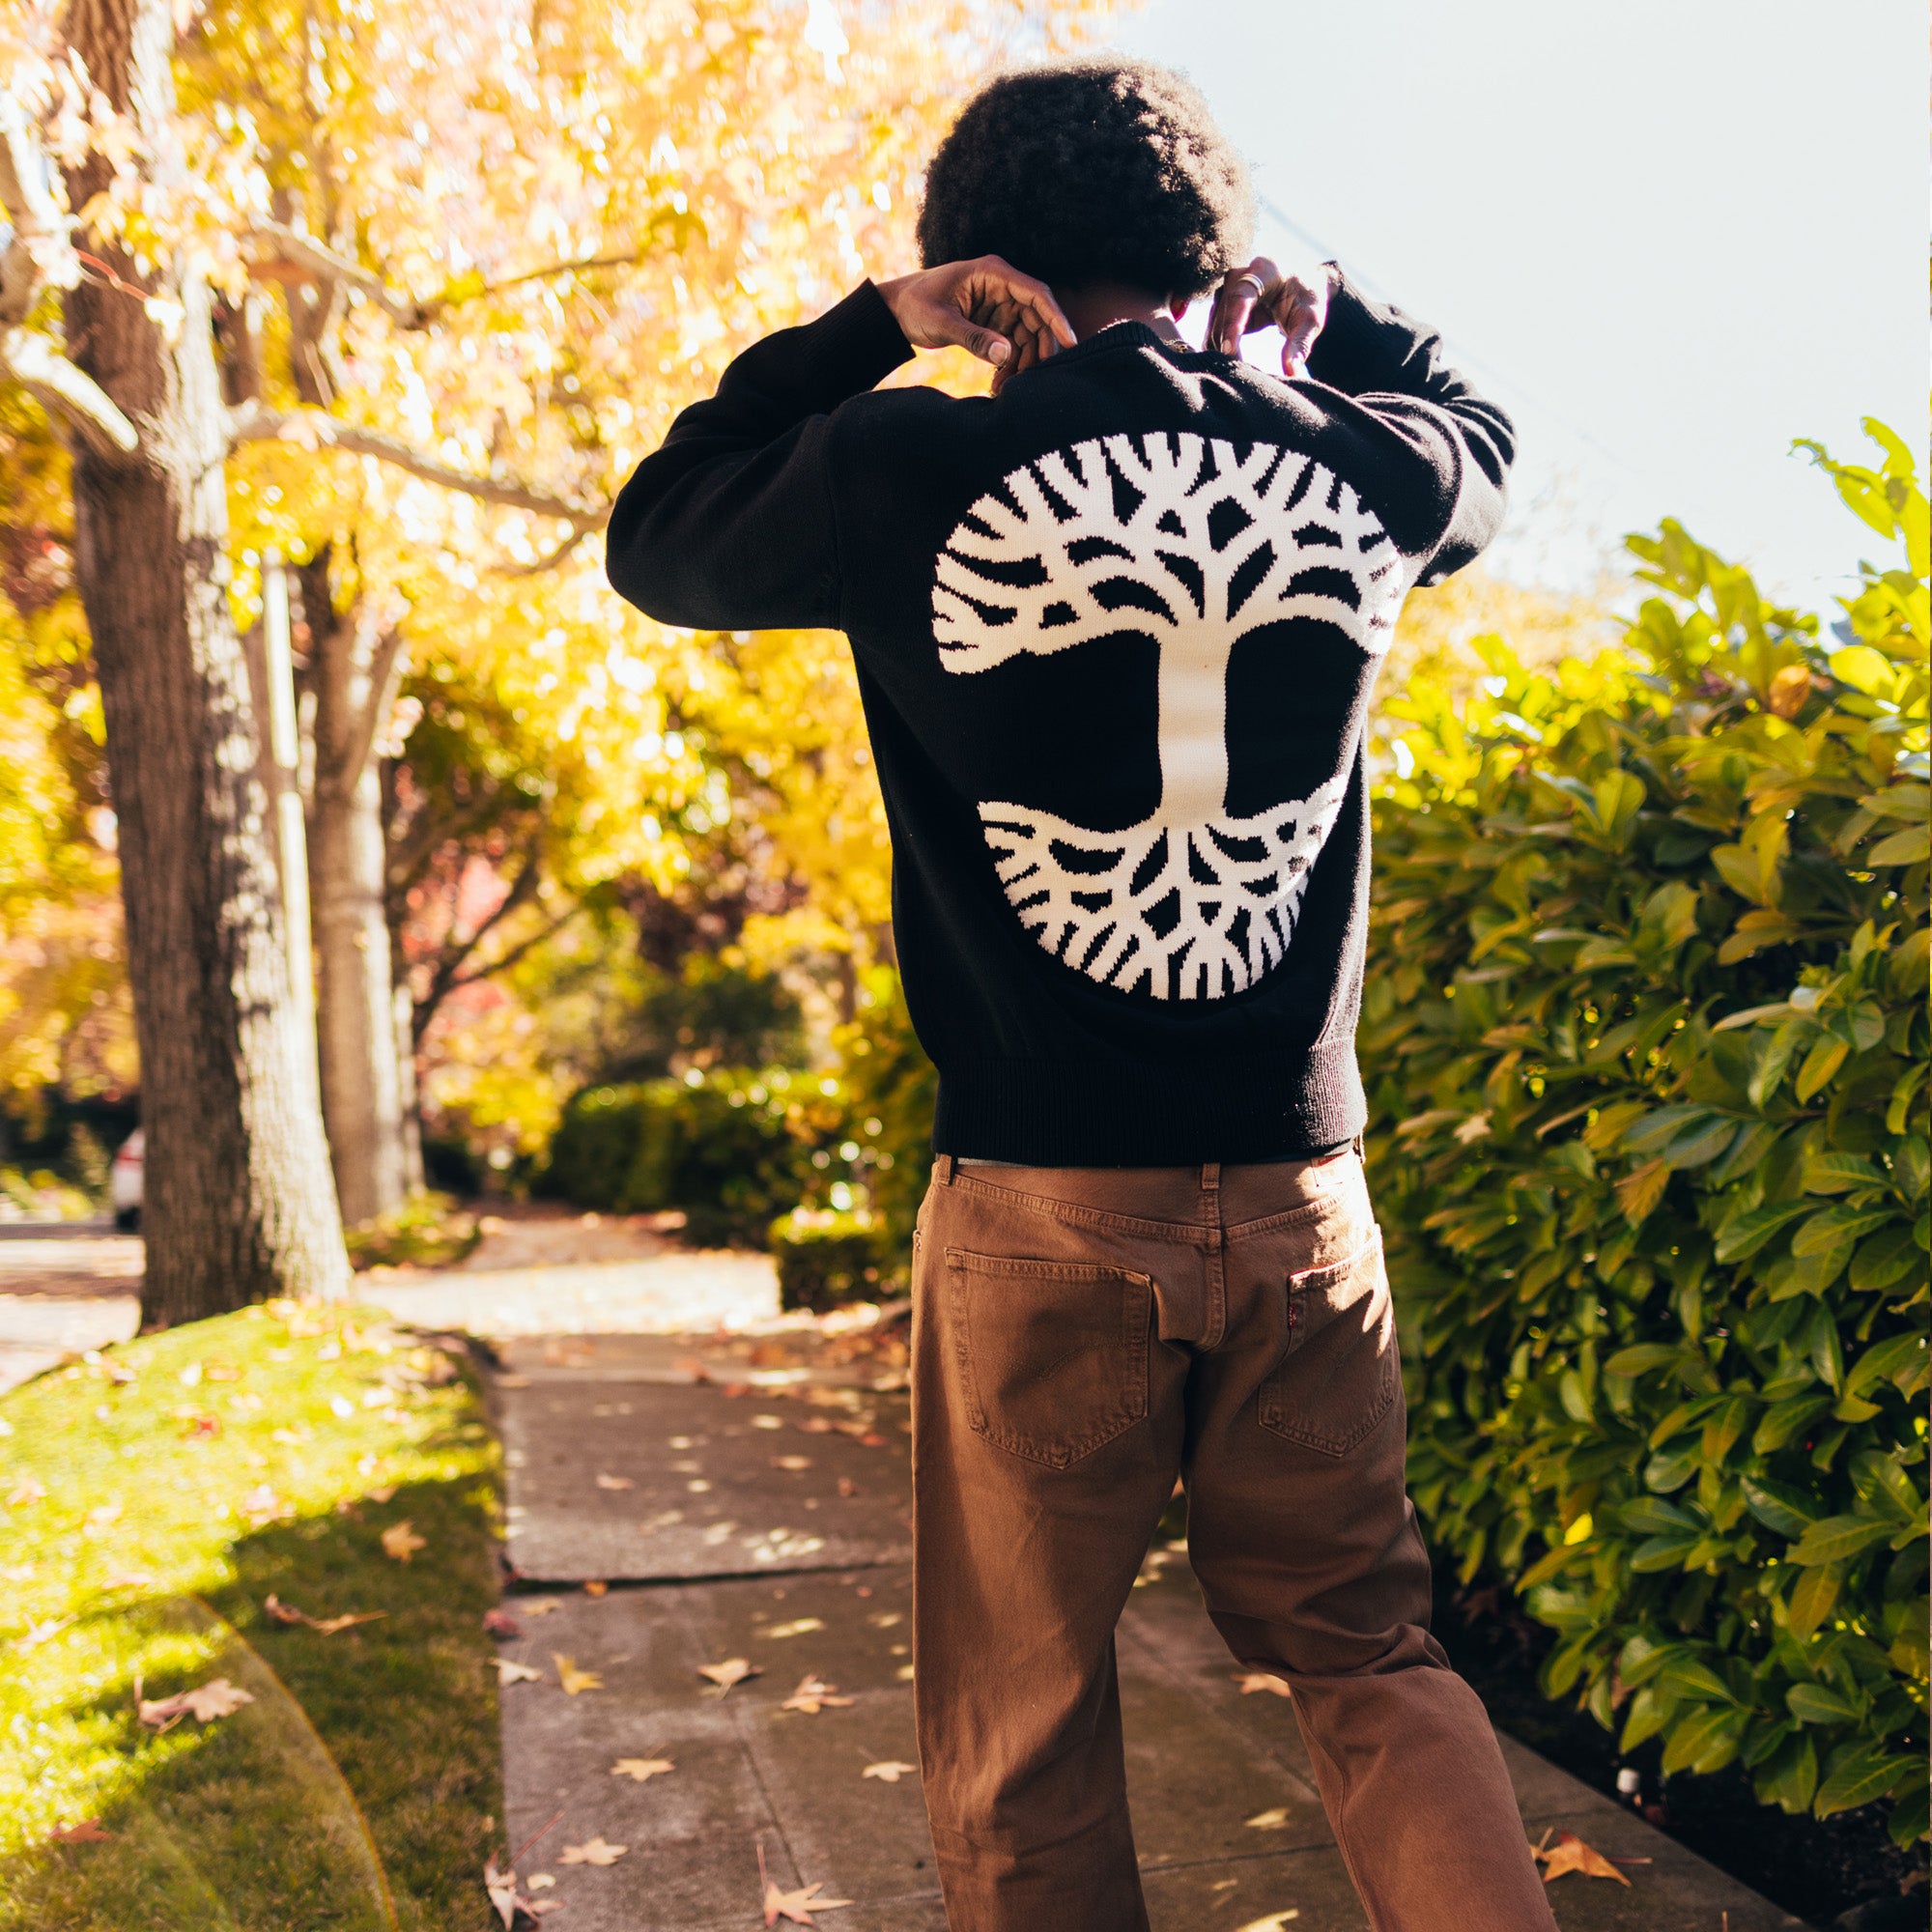 A man walking outside in a heavy-weight knit, black sweater with a large white Oaklandish tree logo on the back.